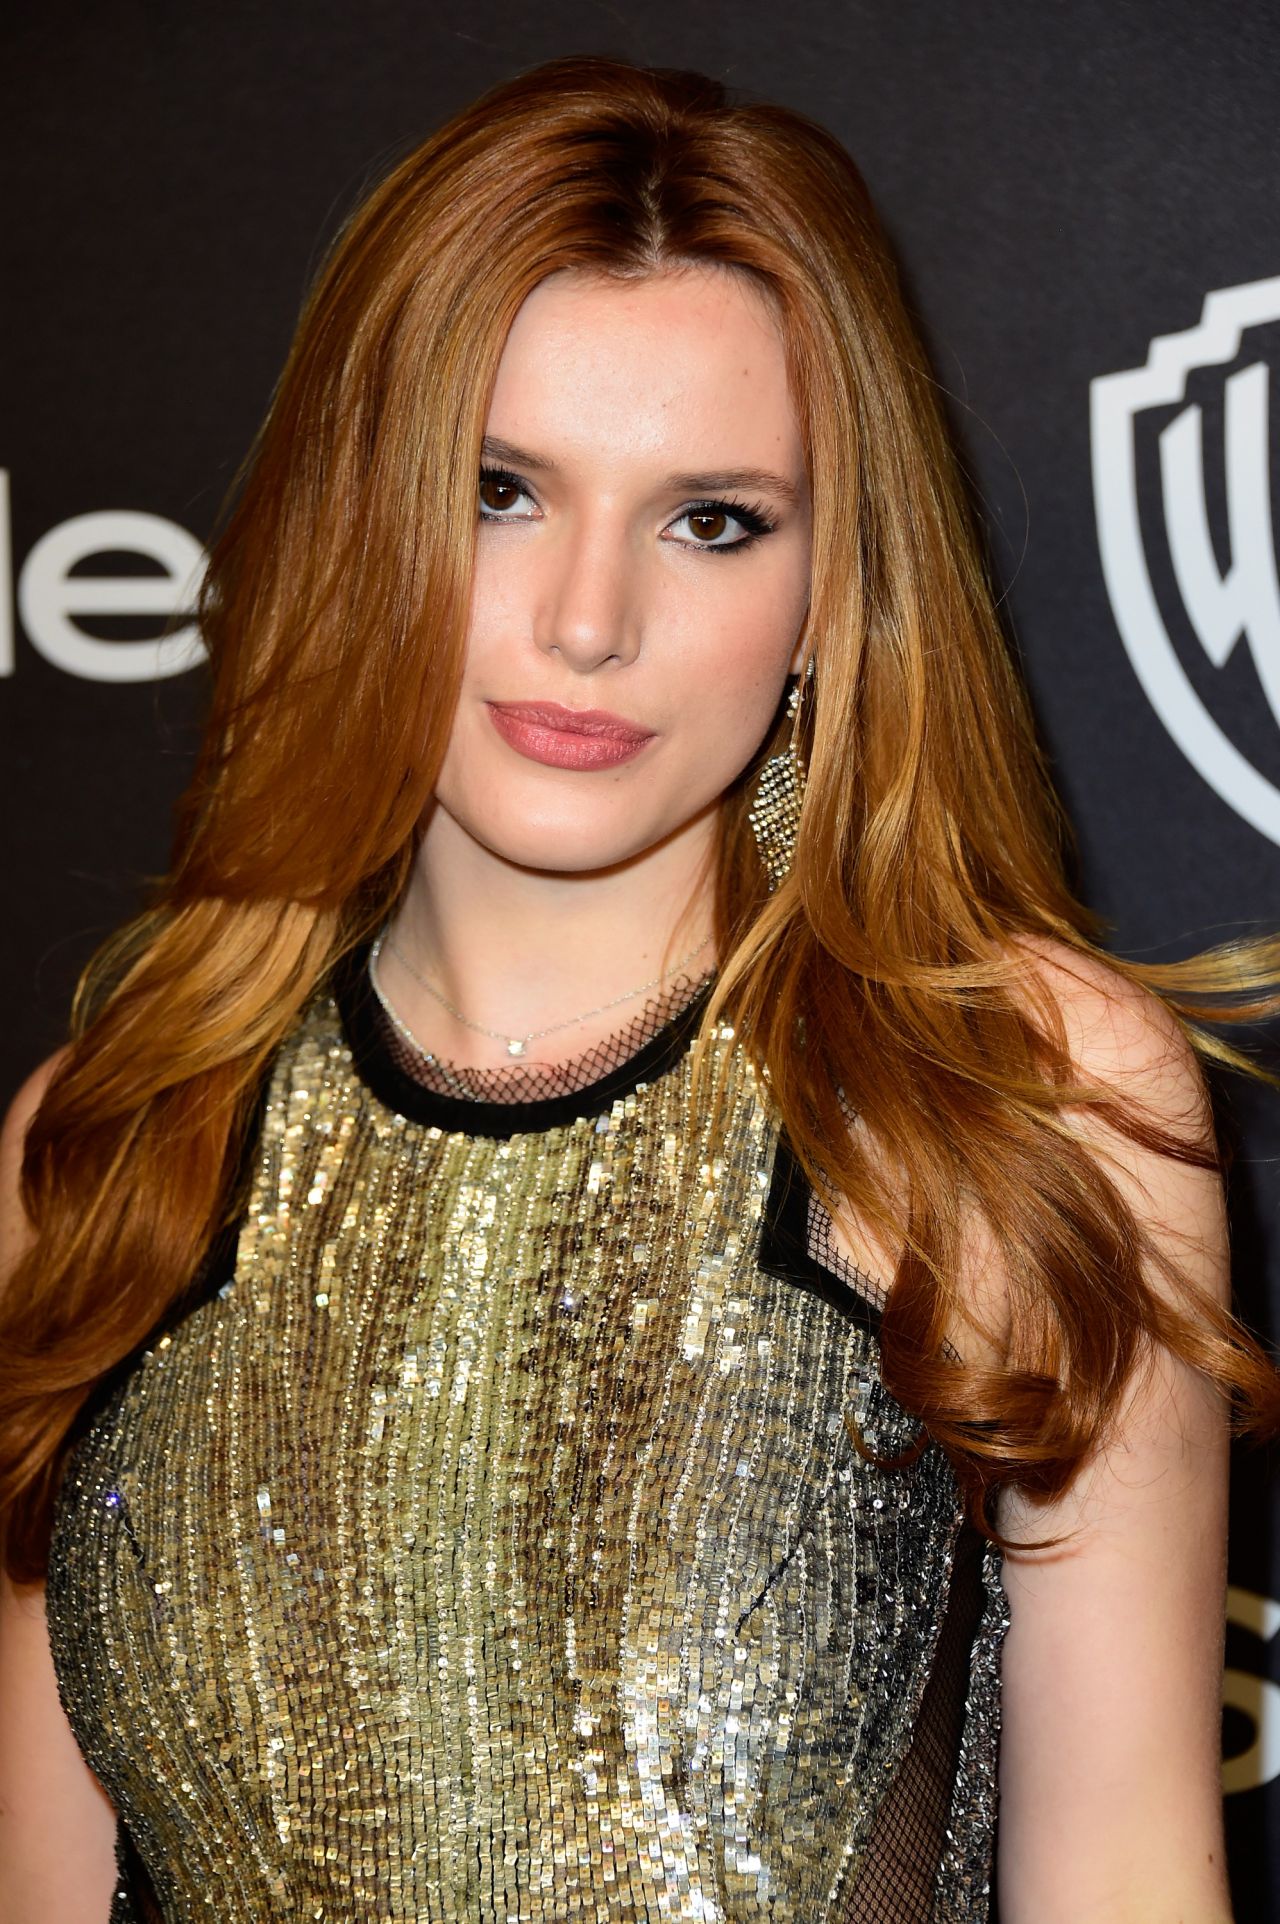 Behind The Scenes With Bella Thorne: Insights Into The Life Of A Young Star